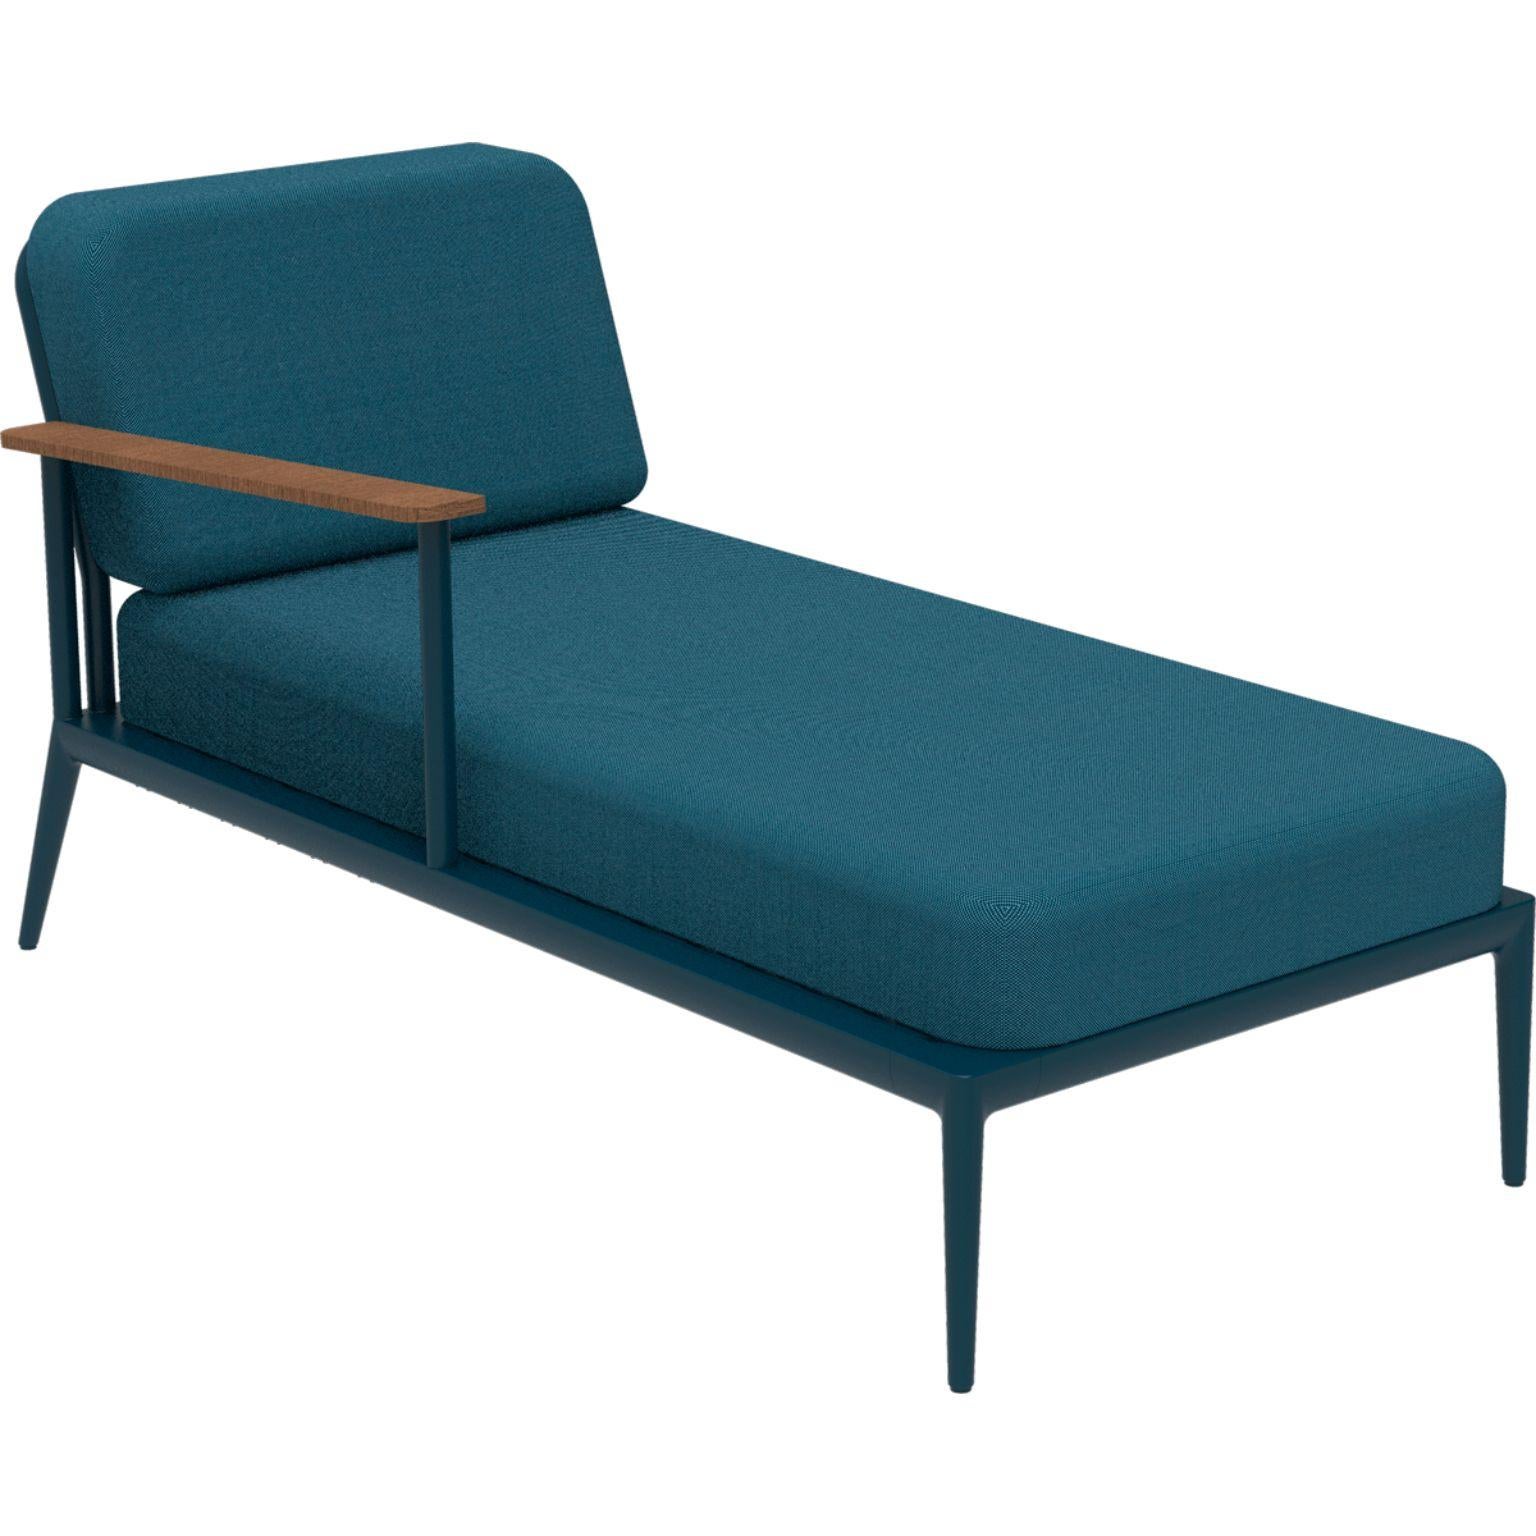 Nature Navy Right Chaise longue by MOWEE
Dimensions: D155 x W76 x H81 cm (seat height 42 cm).
Material: Aluminum, upholstery and Iroko Wood.
Weight: 28 kg.
Also available in different colors and finishes. 

An unmistakable collection for its